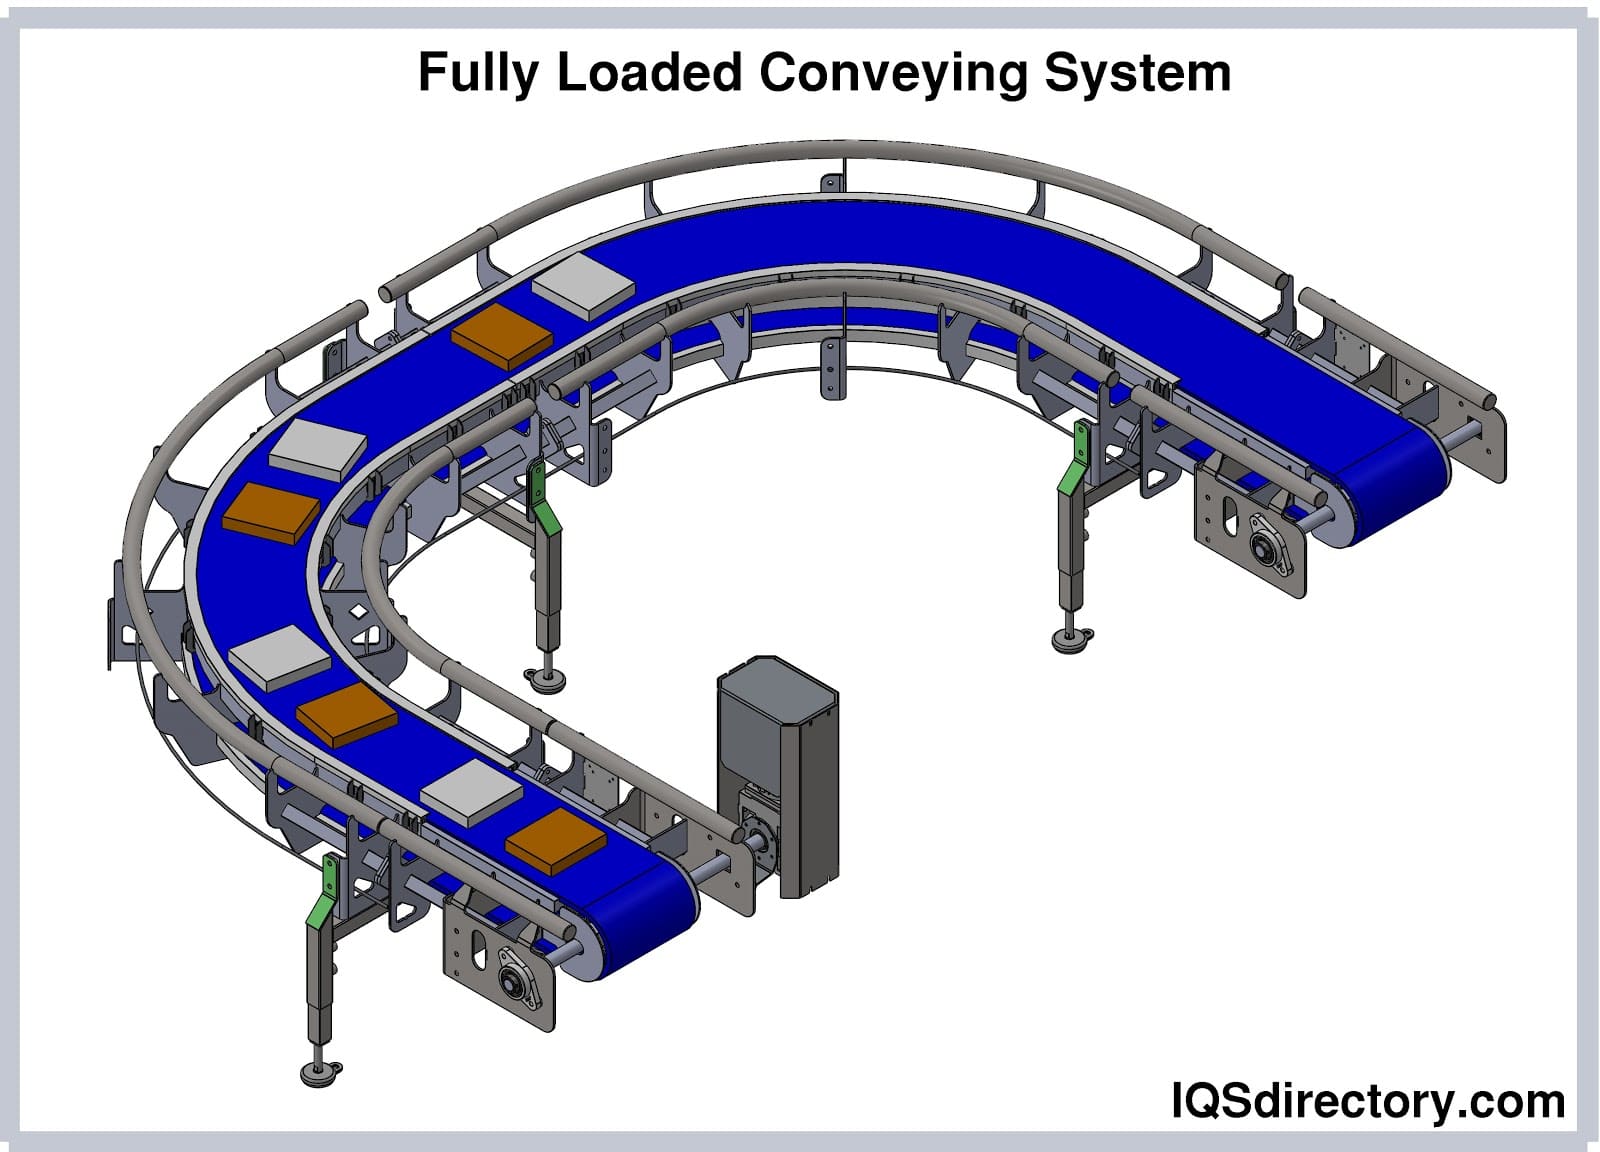 Fully Loaded Conveying System